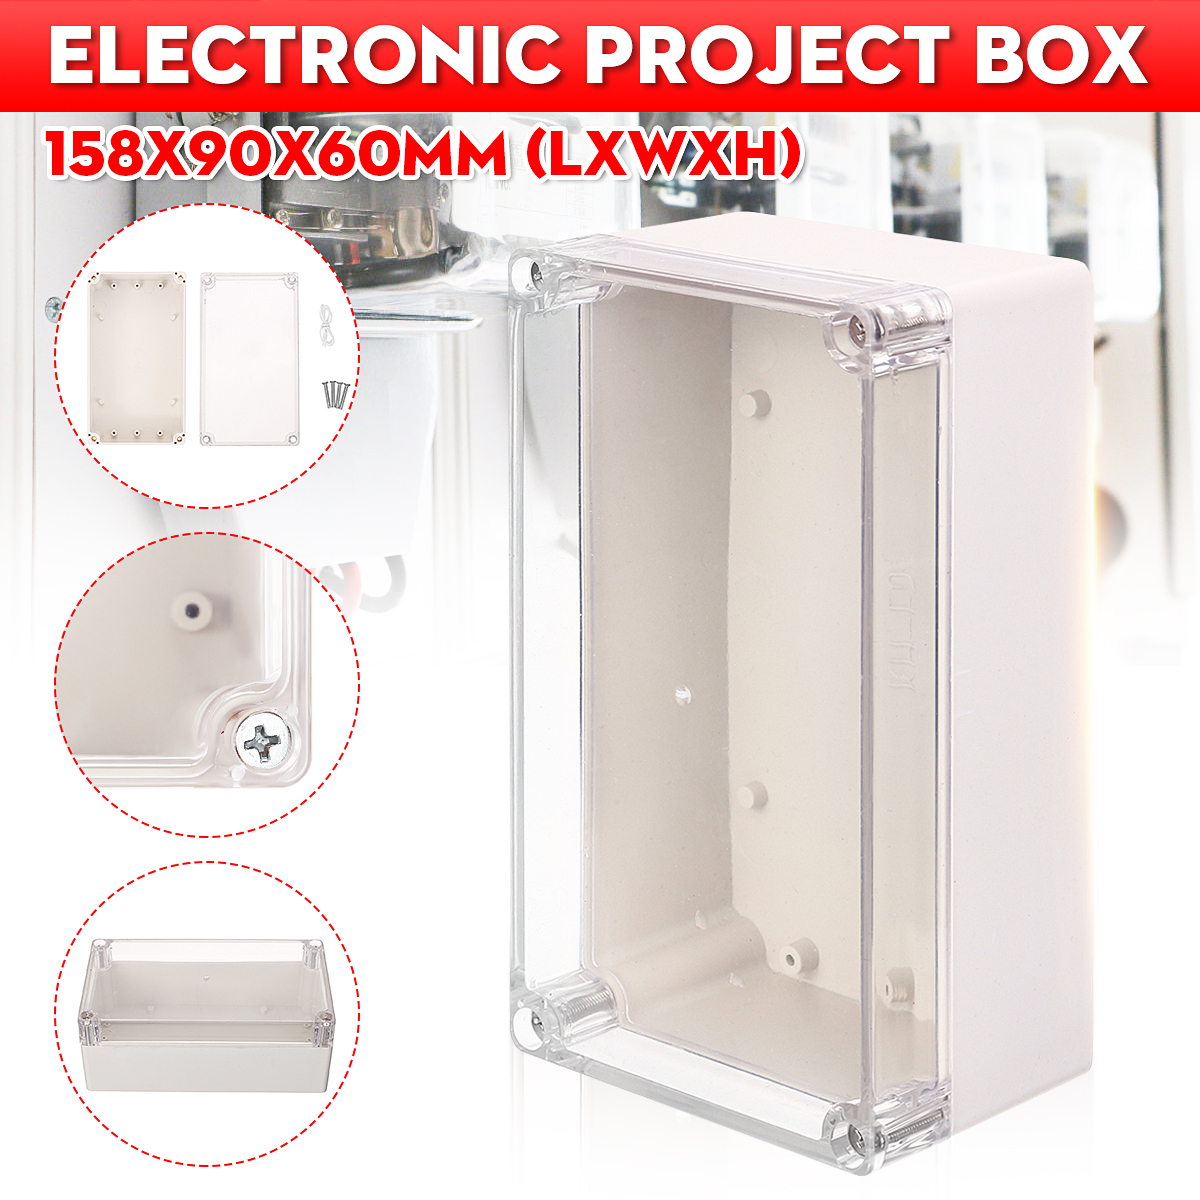 Plastic-Waterproof-Electronic-Project-Box-Clear-Cover-Electronic-Project-Case-1589060mm-1595735-2